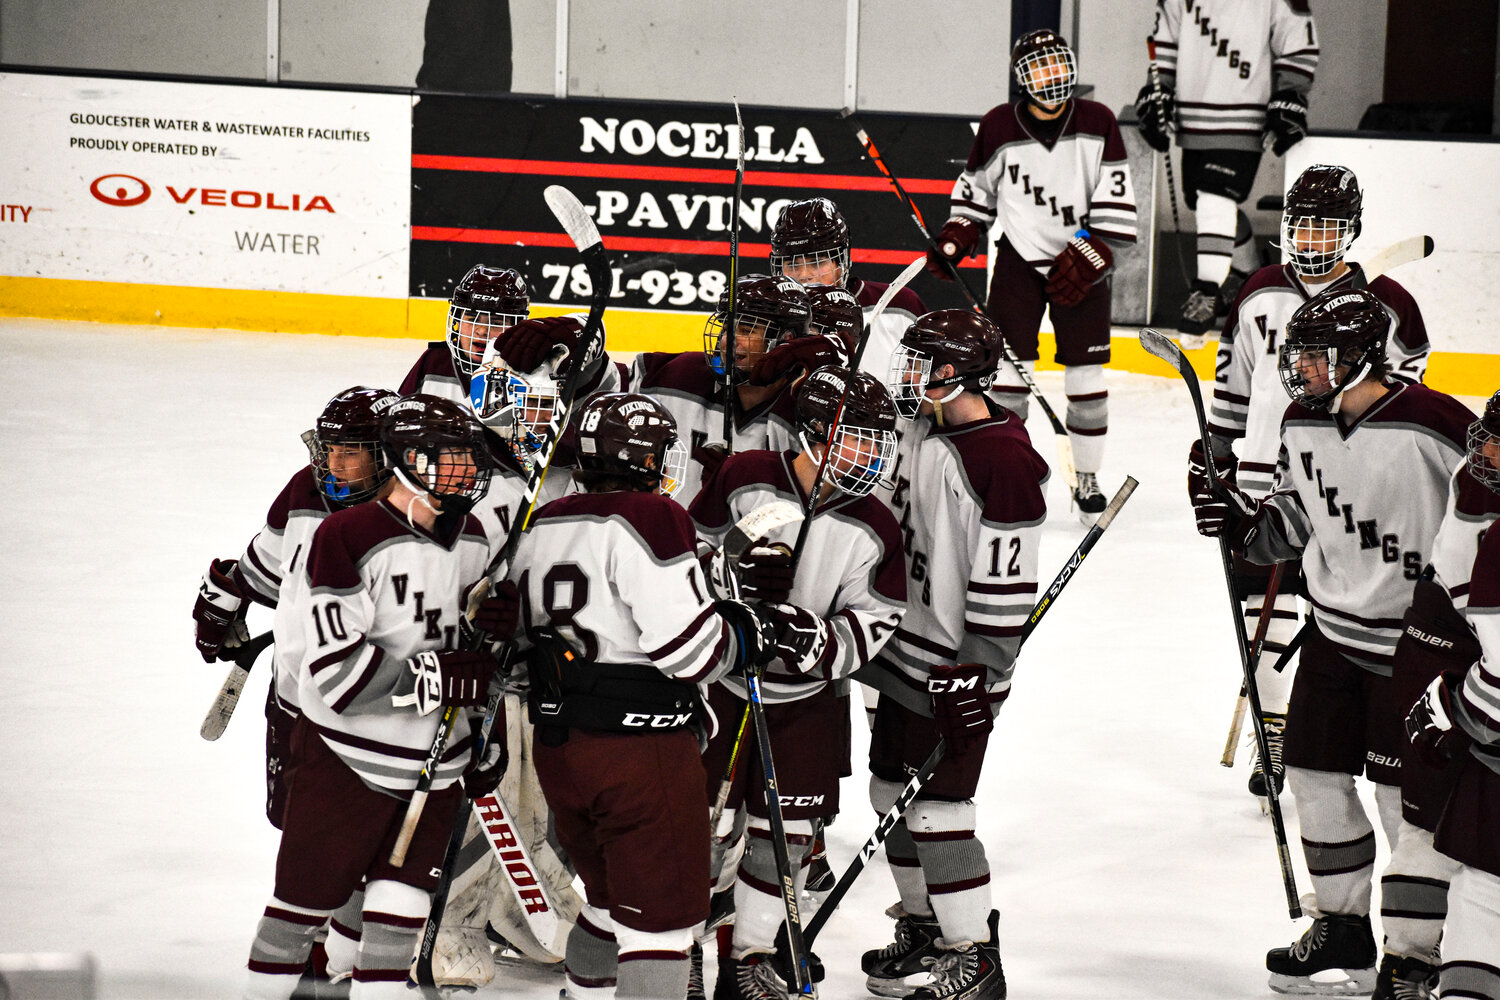 JANUARY | Sweet victory came Monday, January 20 for the Rockport Vikings JV hockey team, which won 4-1 over Gloucester.  Goals secured by Theo Parianos, Michael DeOreo and TJ Brunner.  Photo: Lonna Brunner